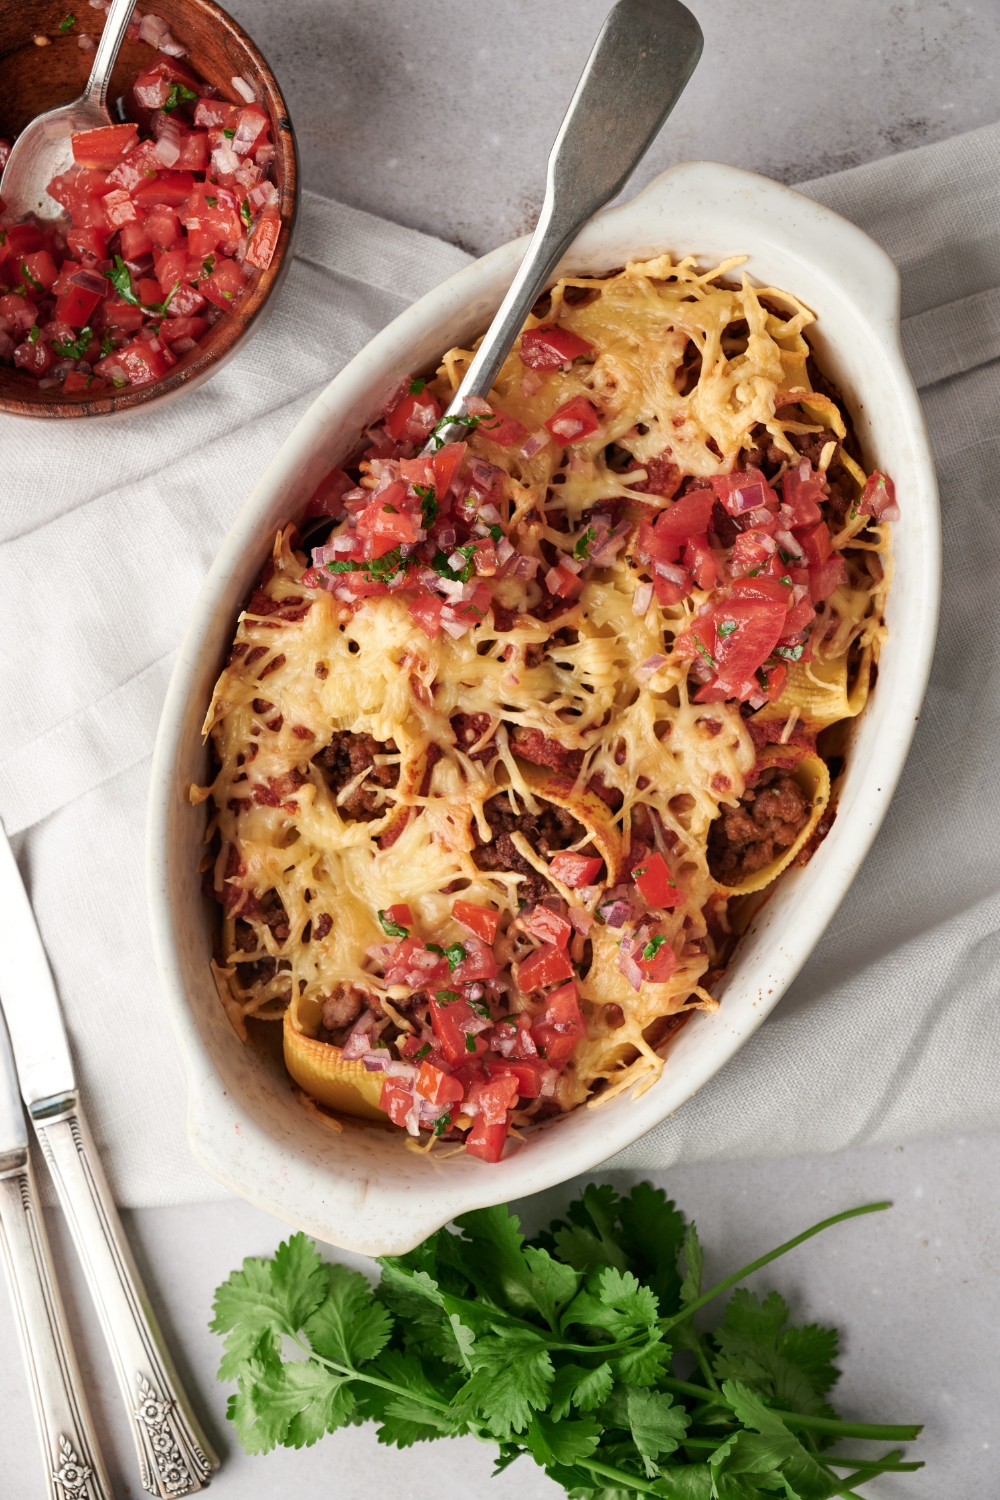 A baking dish filled with baked pasta shells covered in melted cheese and pico de gallo.